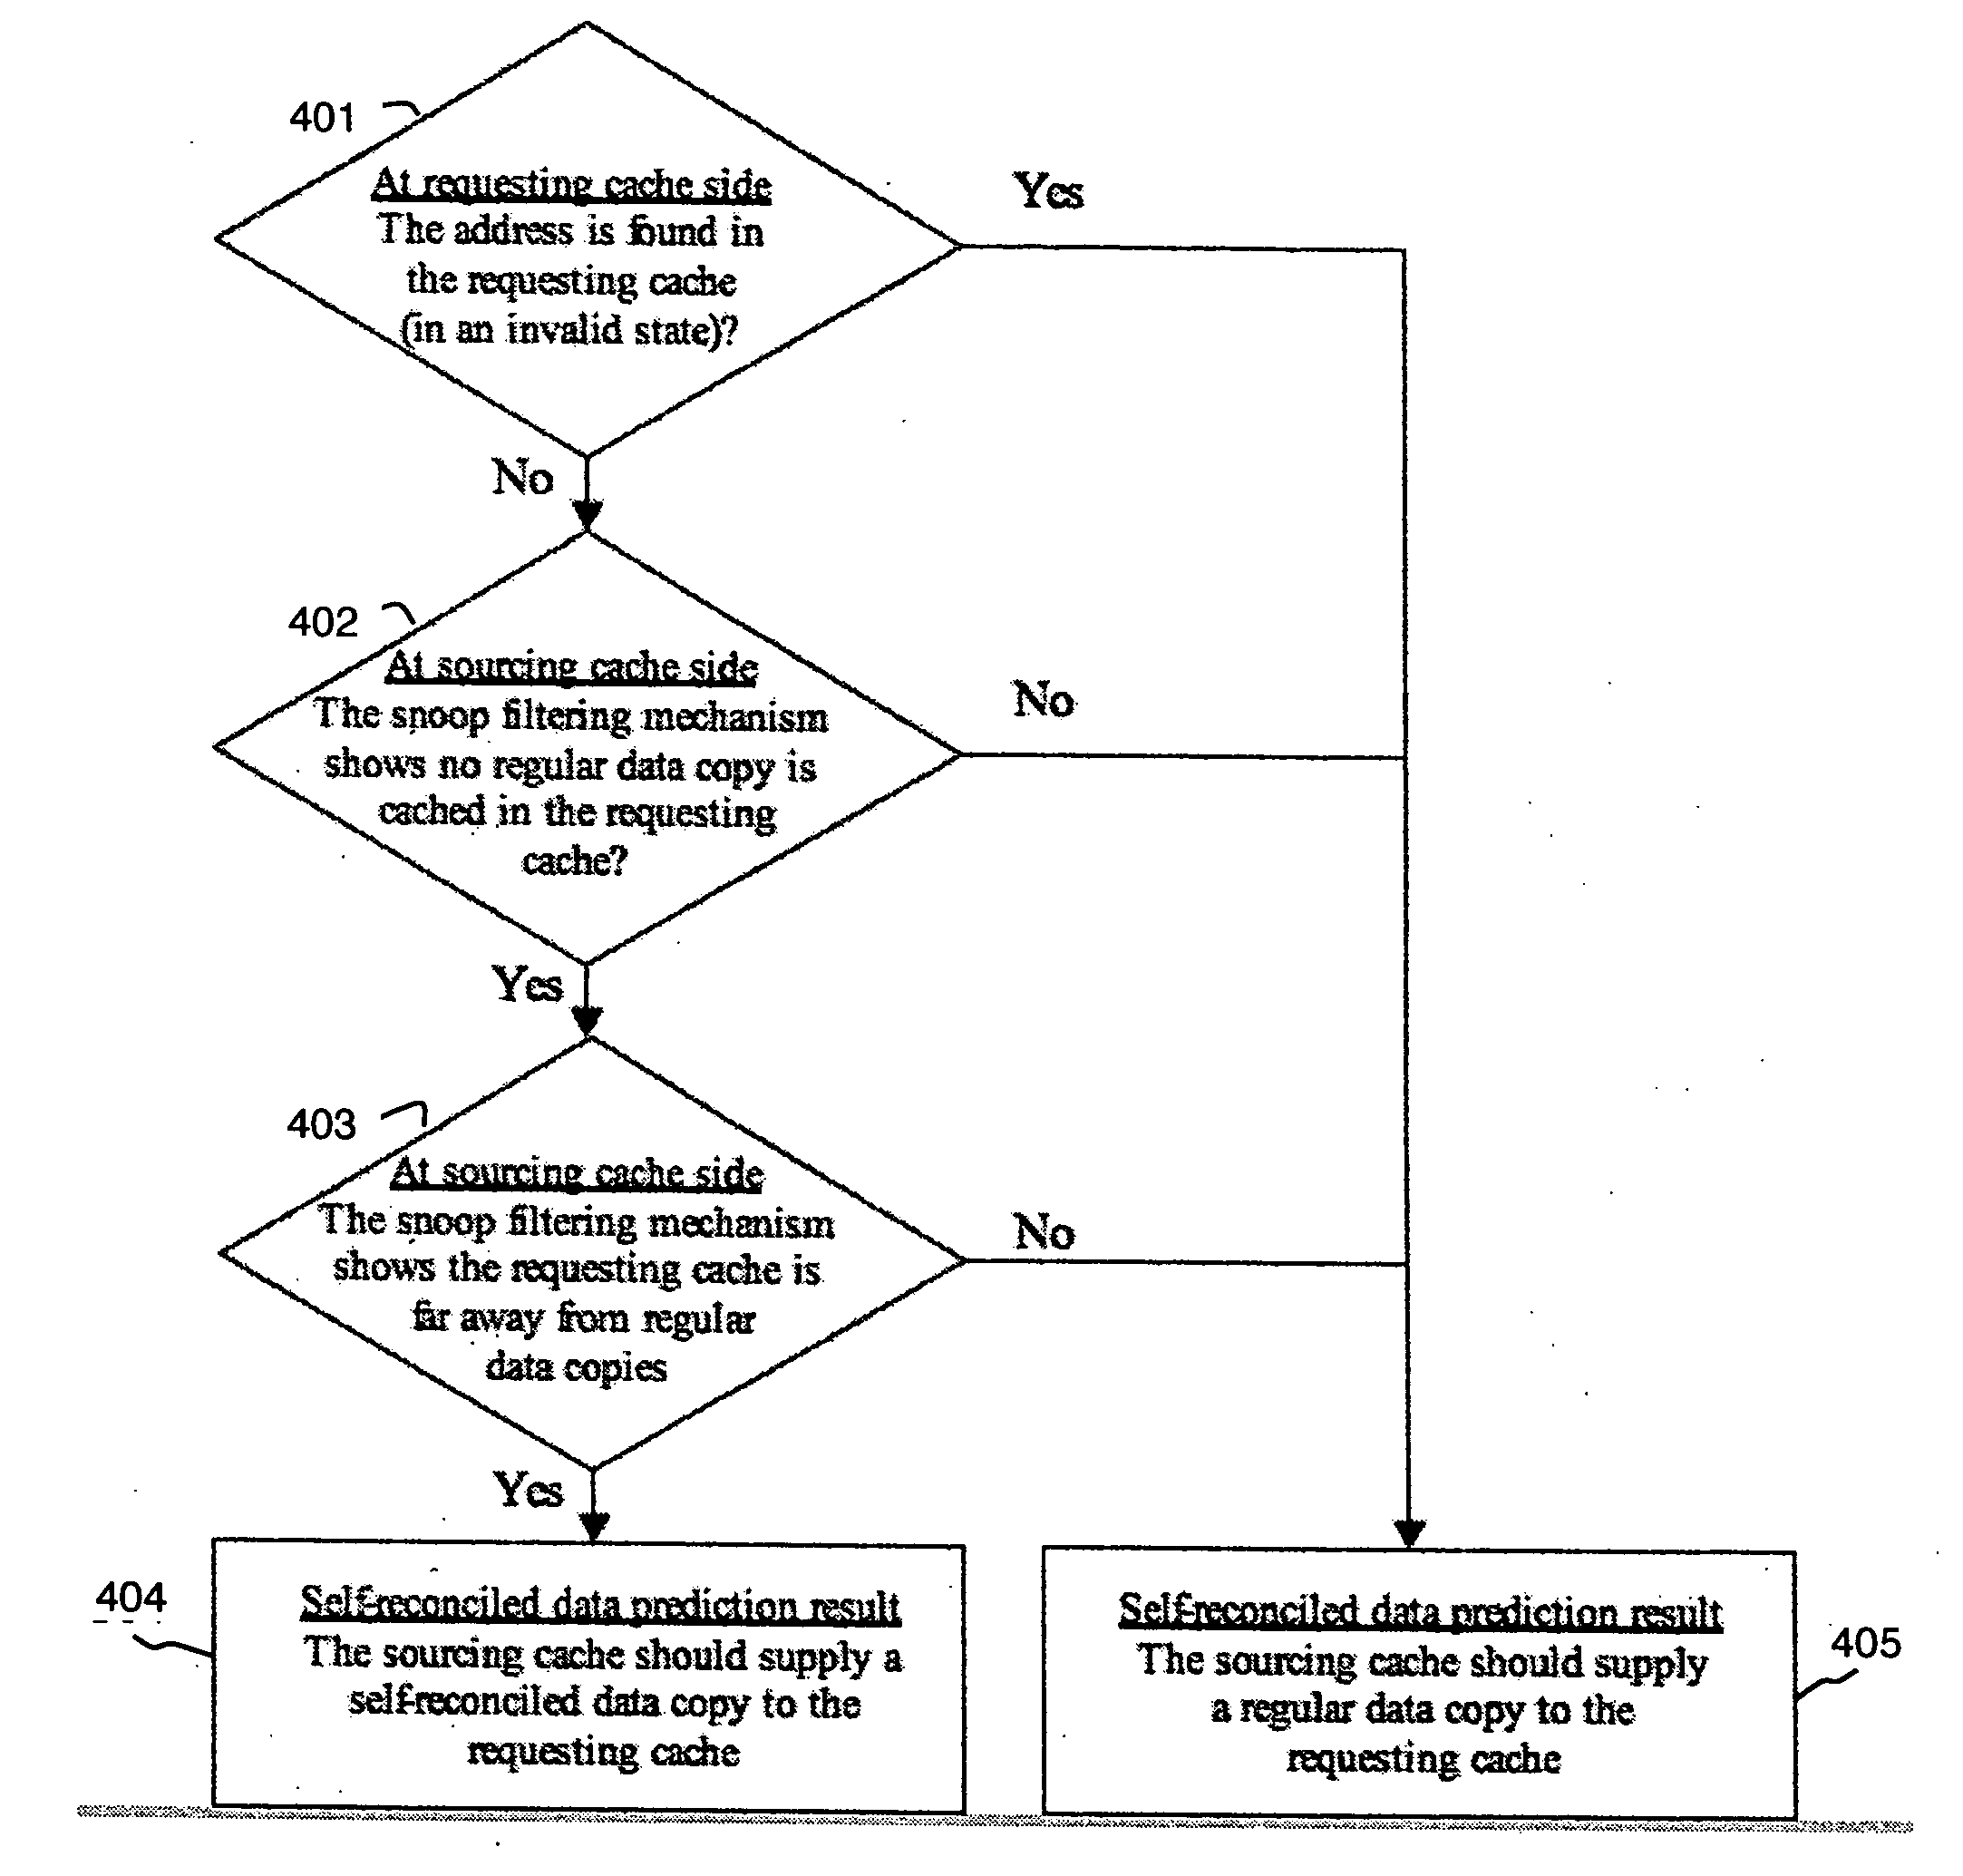 Mechanisms and methods of using self-reconciled data to reduce cache coherence overhead in multiprocessor systems